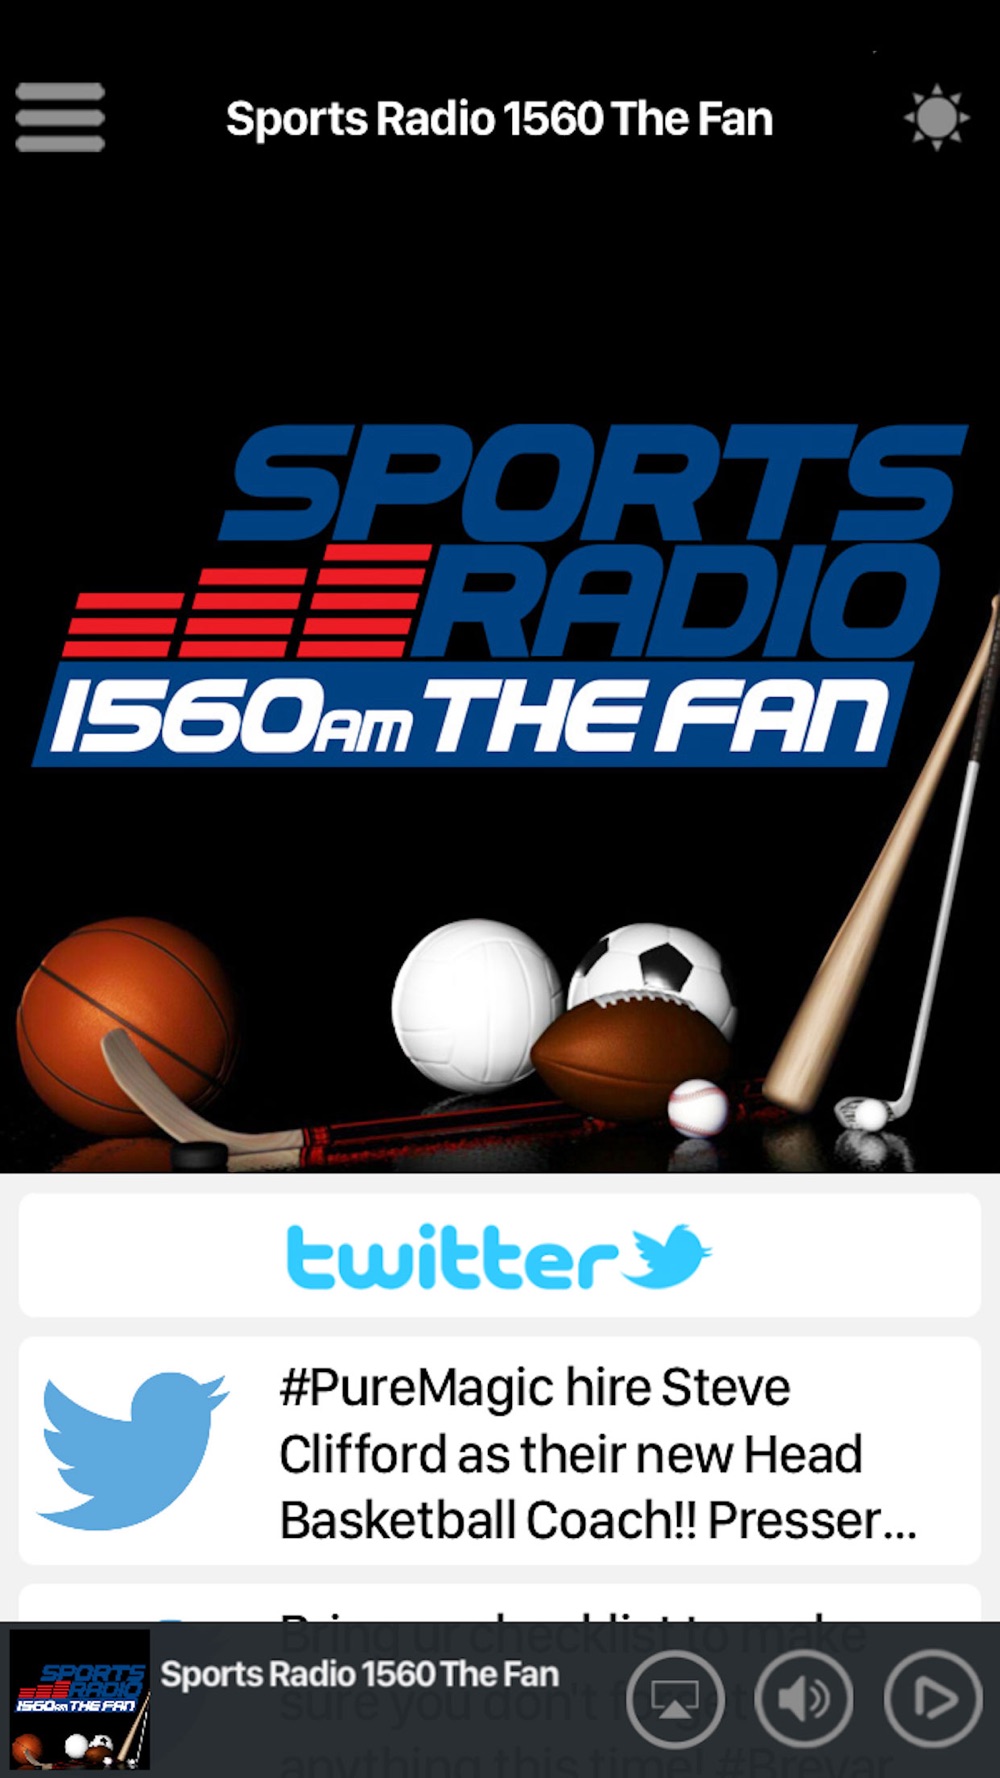 Sports Radio 1560 The Fan Free Download App For Iphone Steprimocom